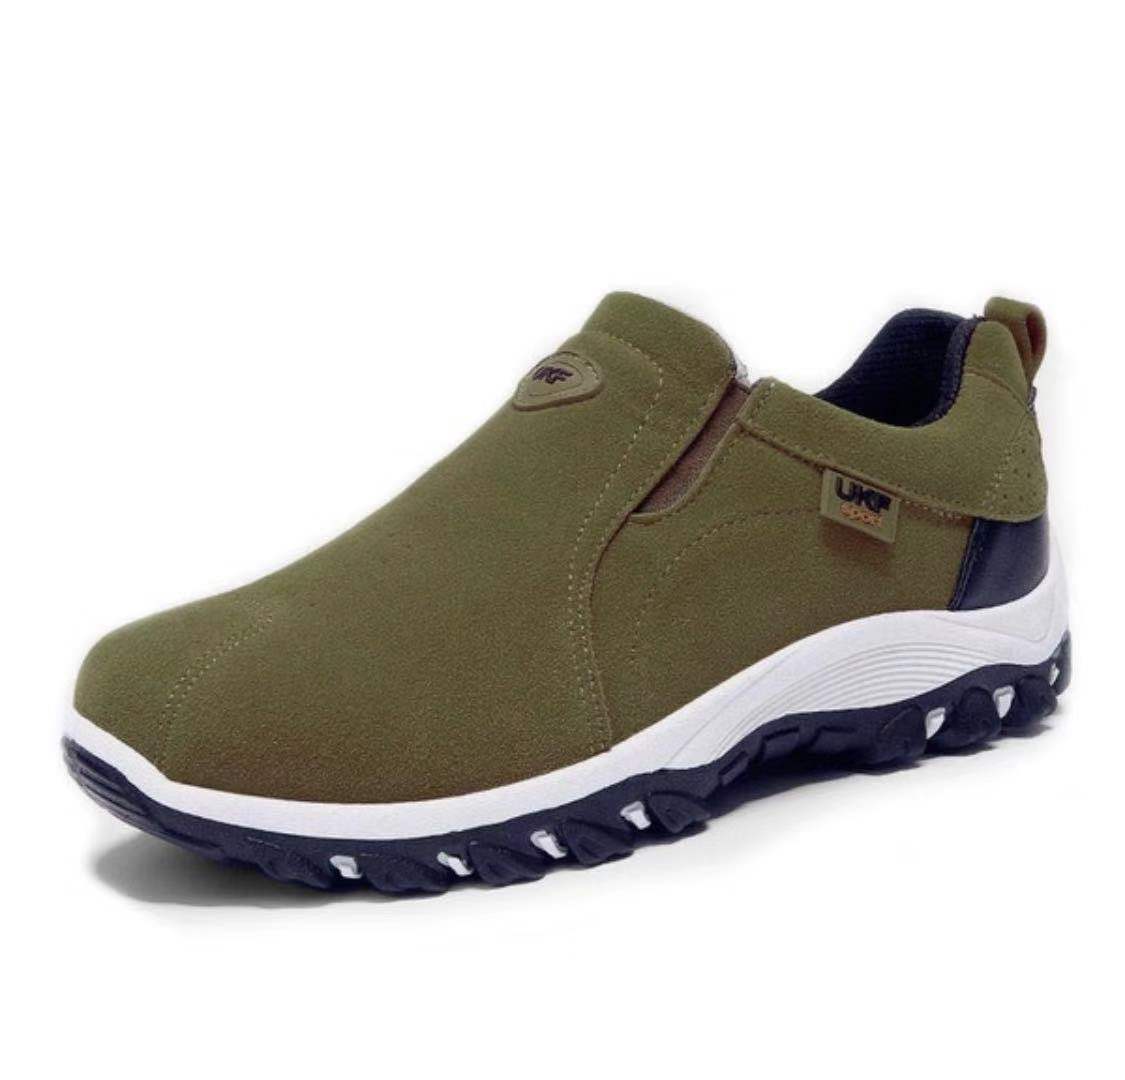 Men's Casual Shoes Breathable Outdoor Lightweight Walking Shoes - Acapparelstore